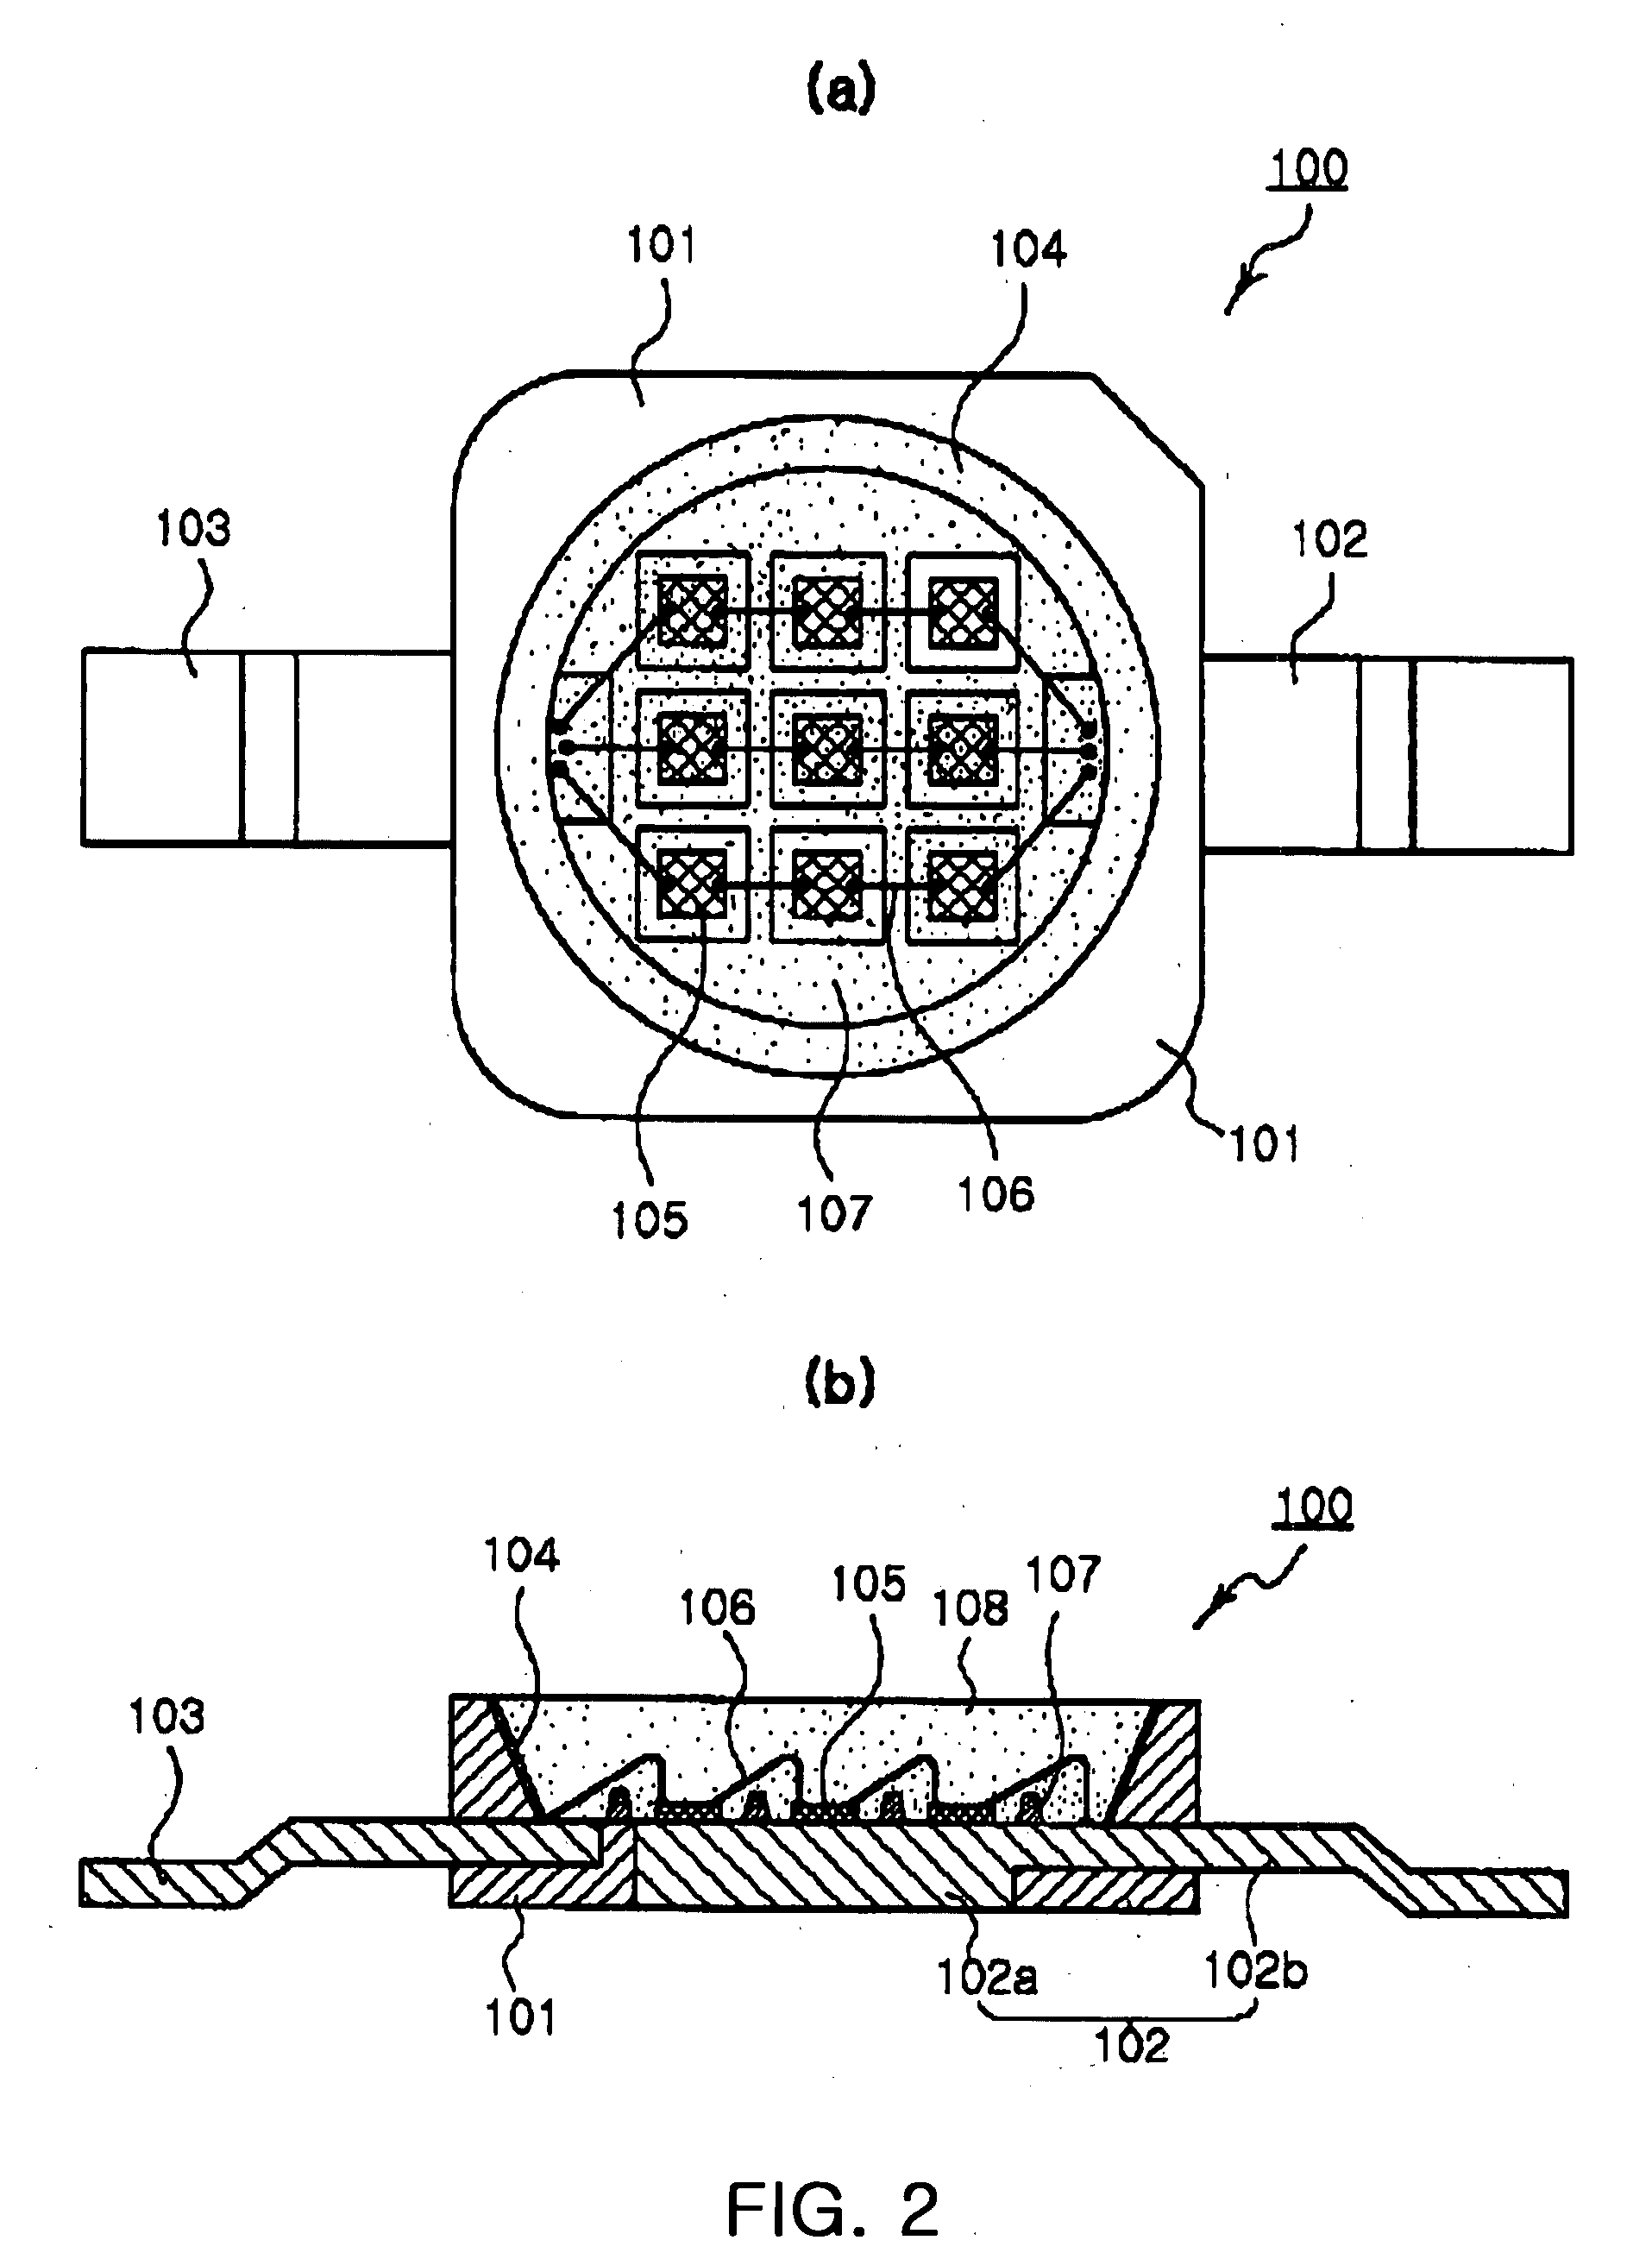 High power light emitting diode package and method of producing the same